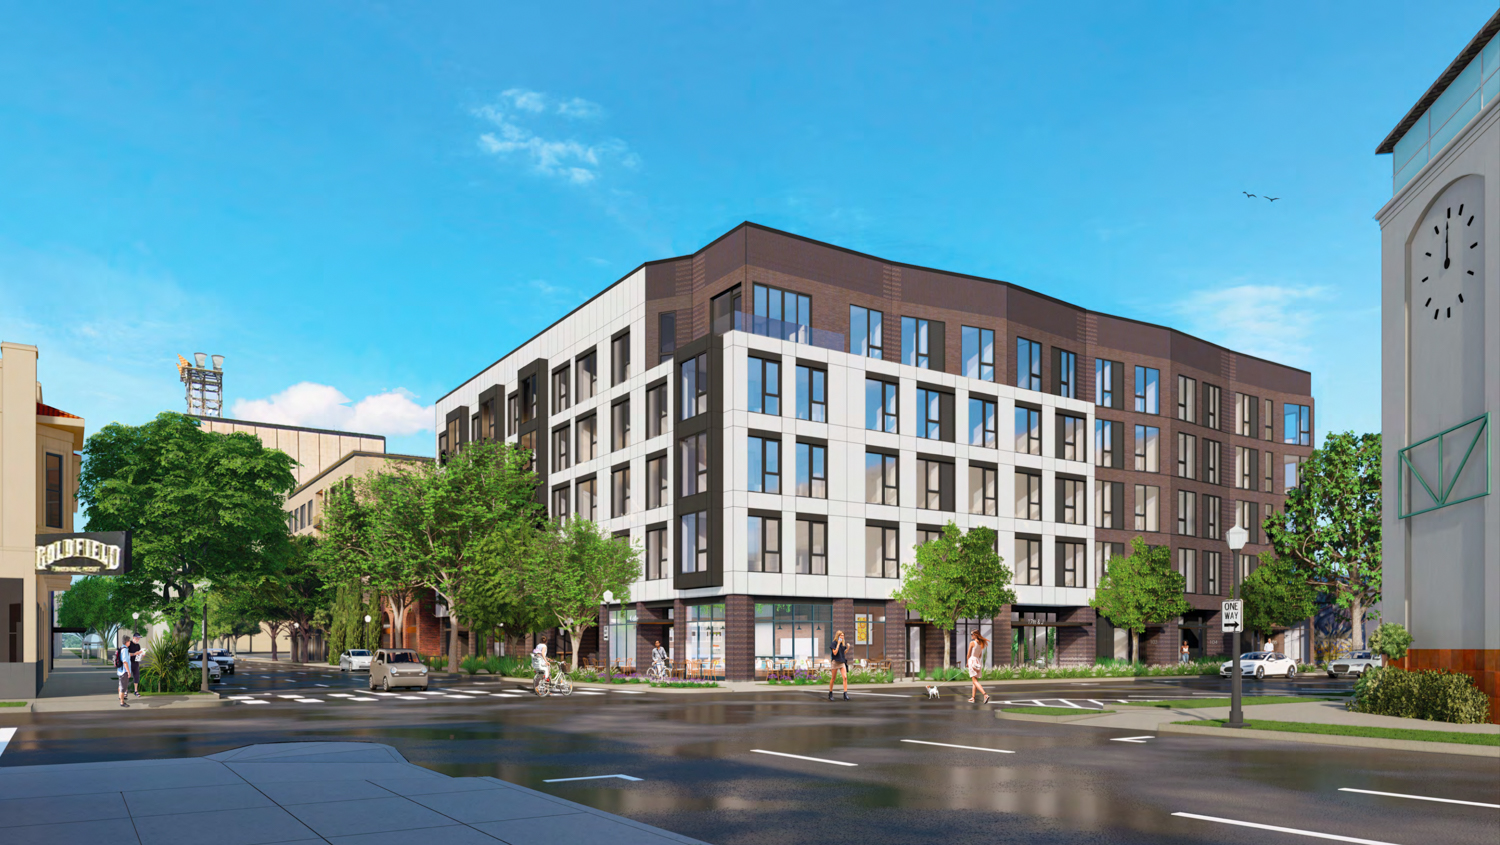 1617 J Street apartments, rendering by C2K Architecture